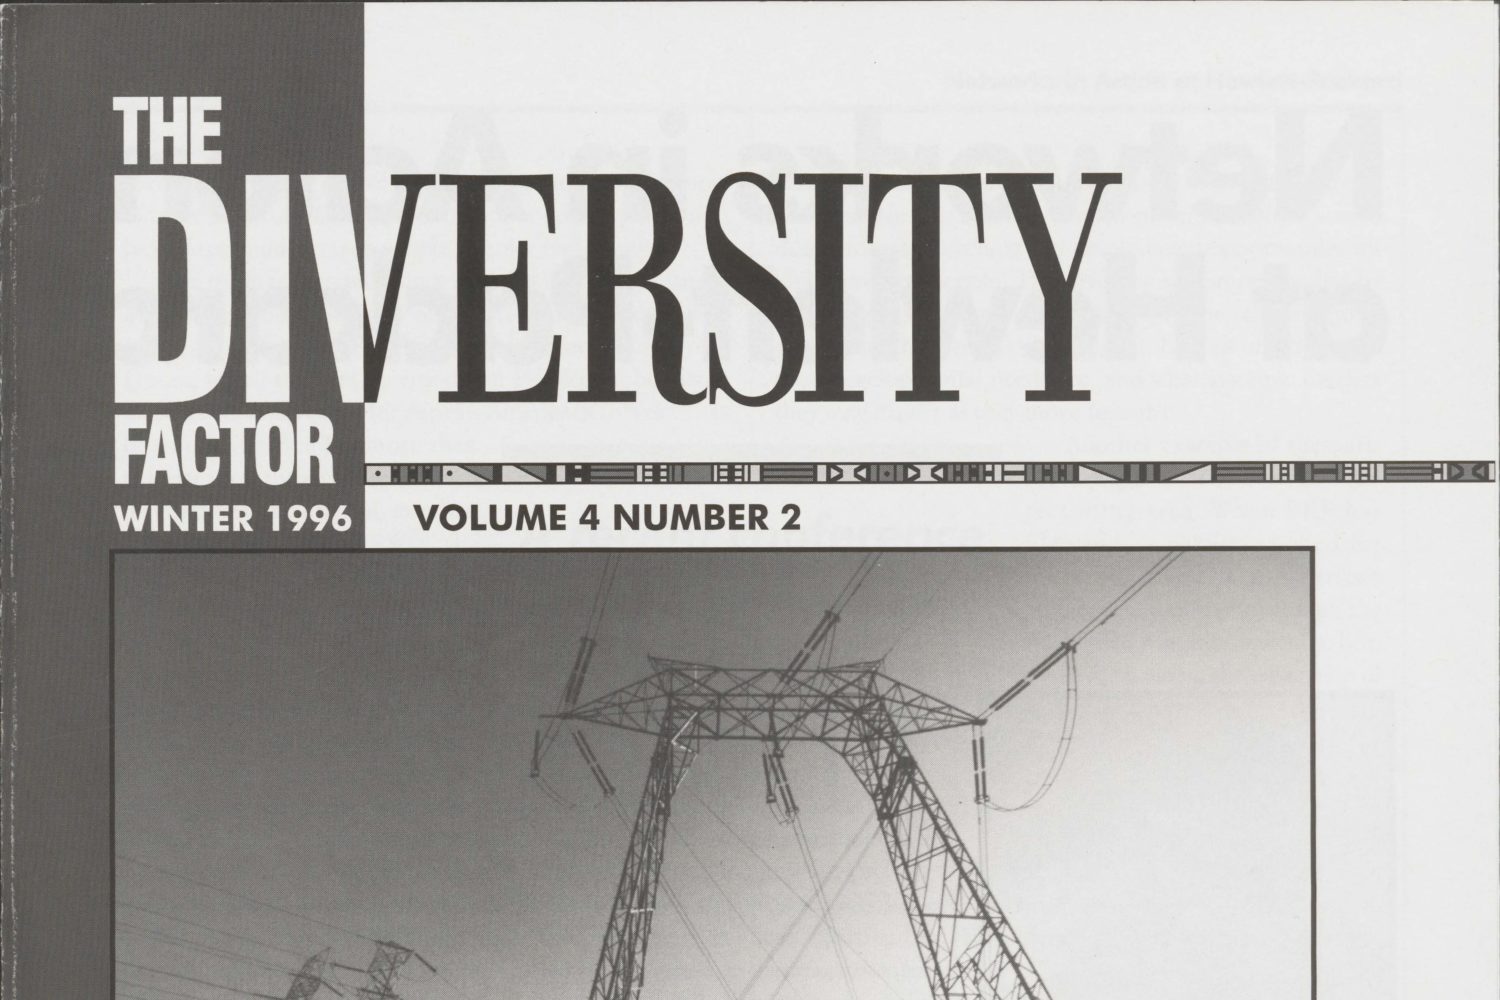 The cover of The Diversity Factor Winter 1996.